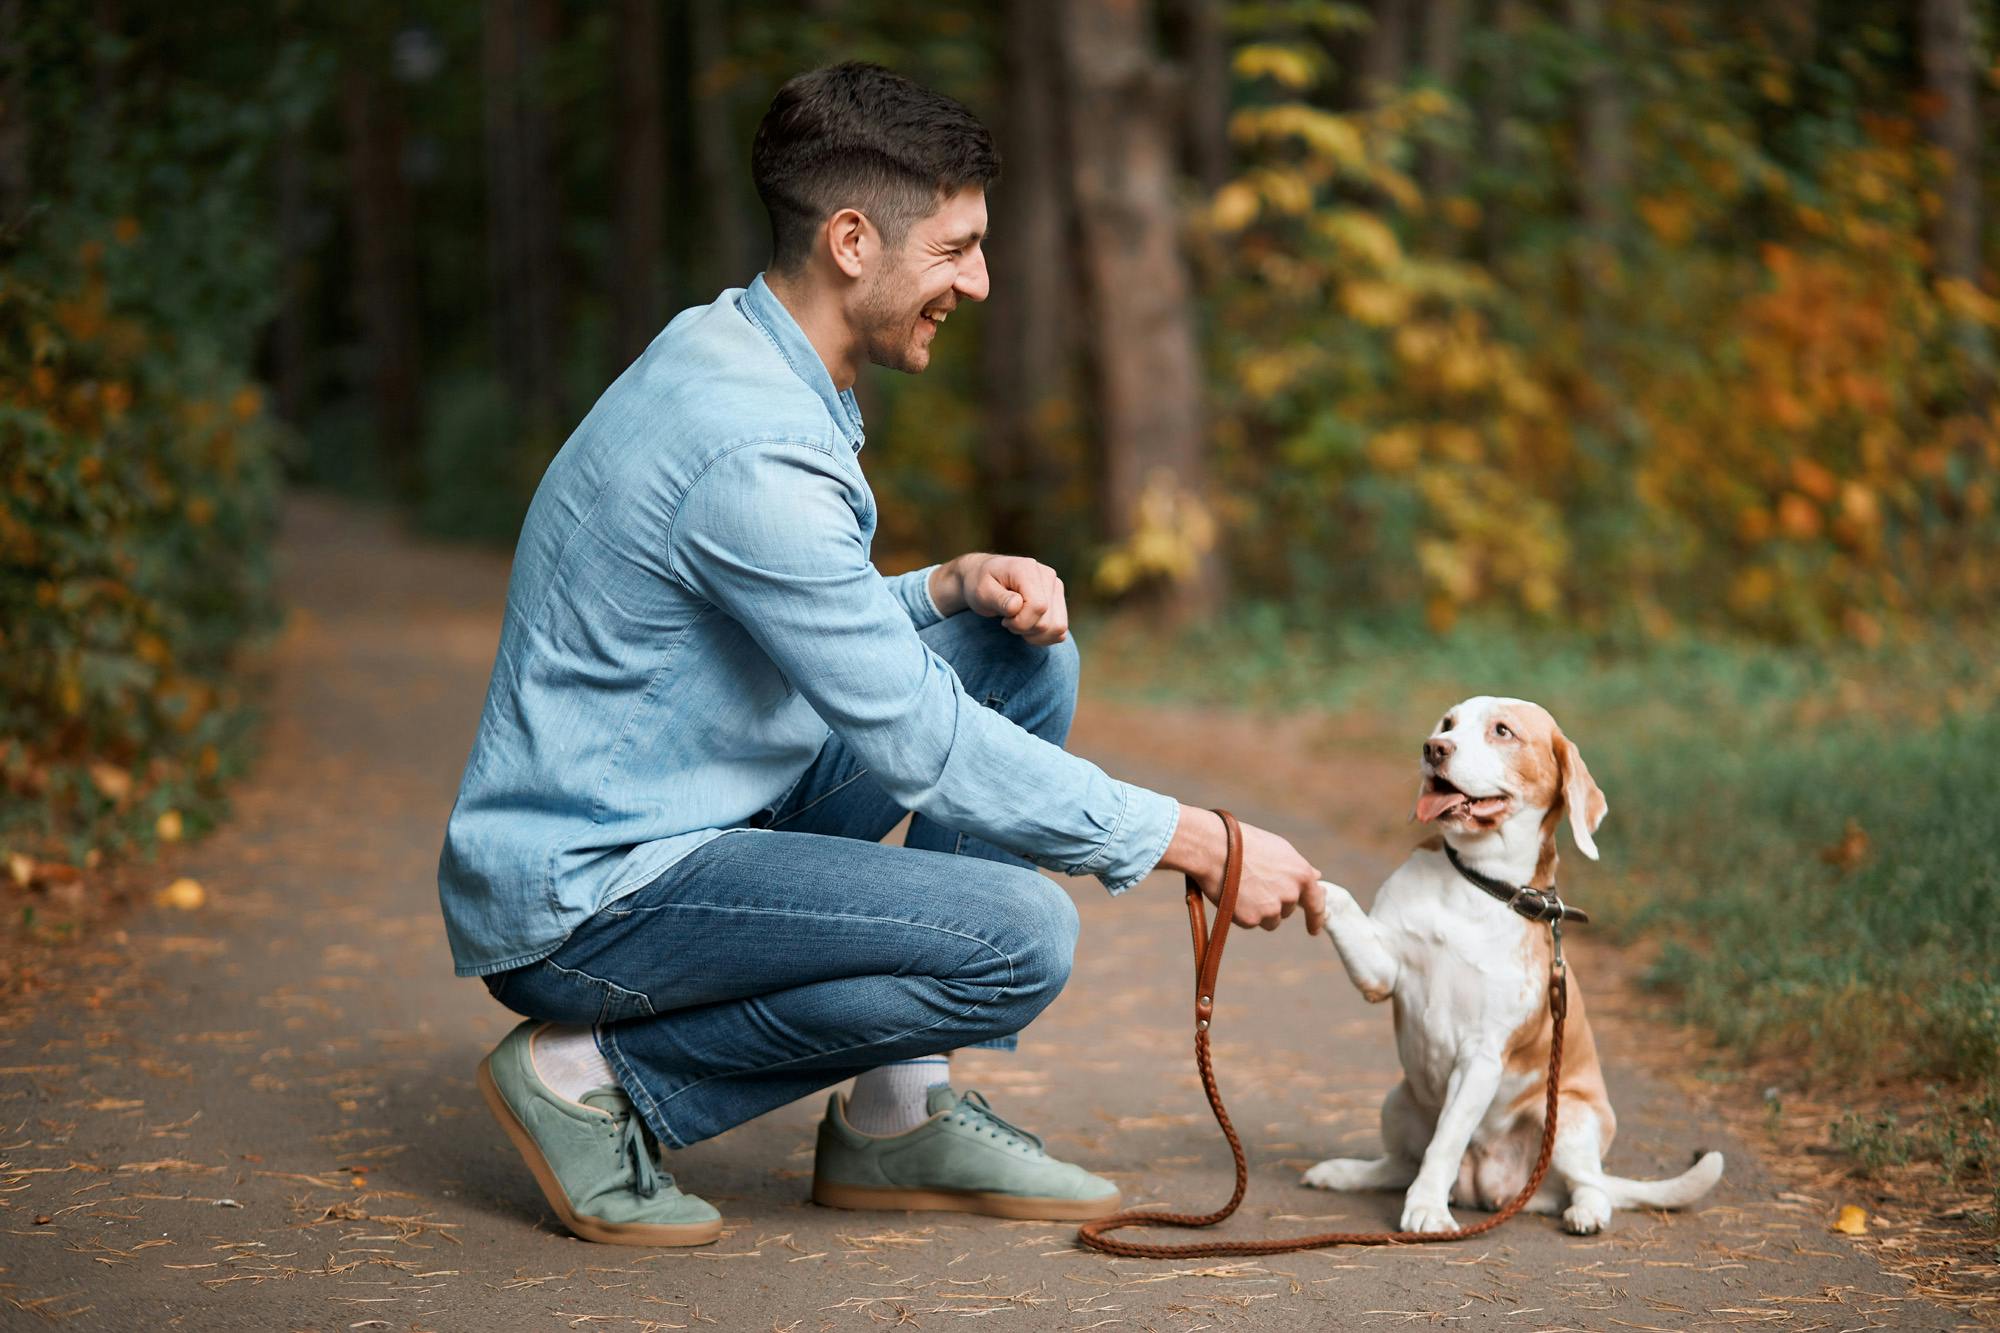 man shaking hands with dog while outside on a walk